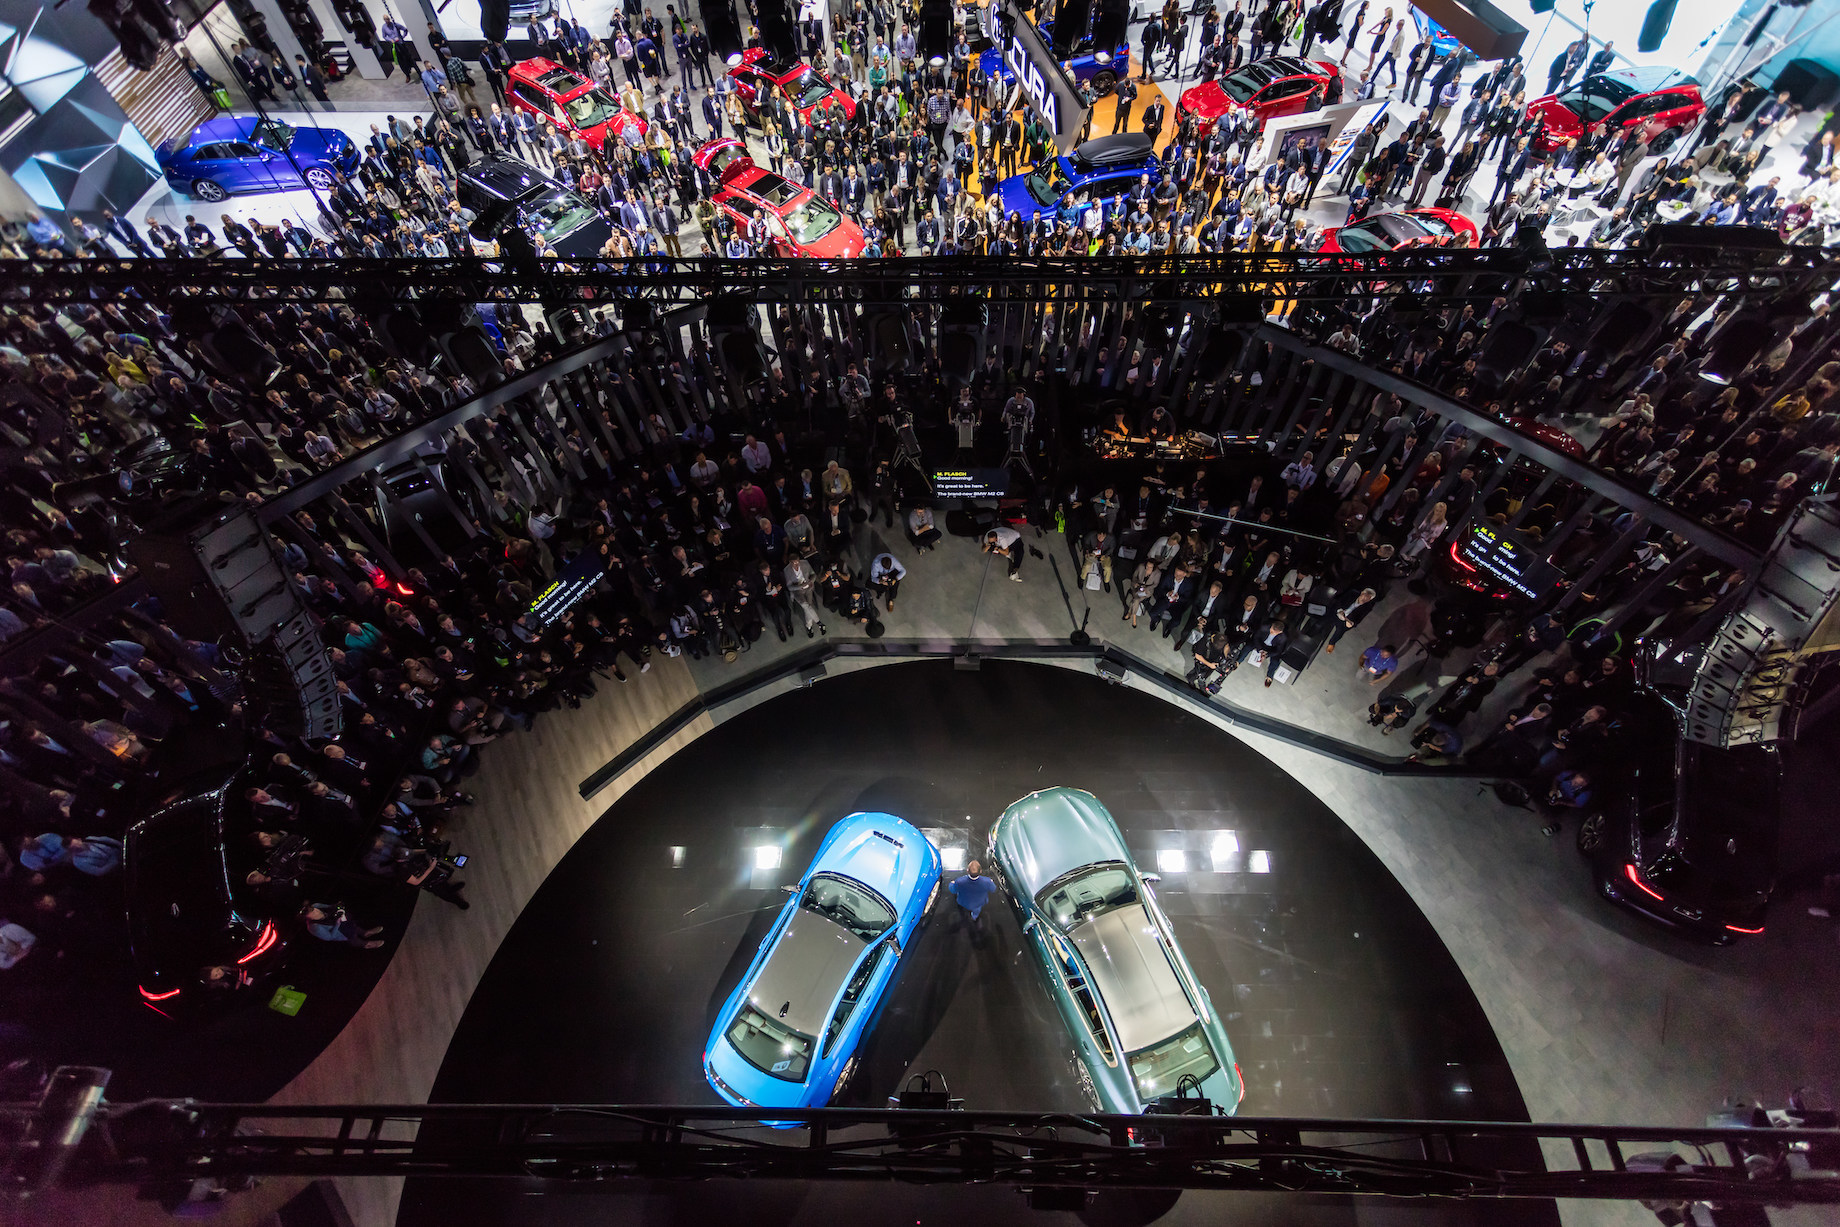 2022 Los Angeles Auto Show Announces Preliminary List of Confirmed Global and North American Vehicle Debuts